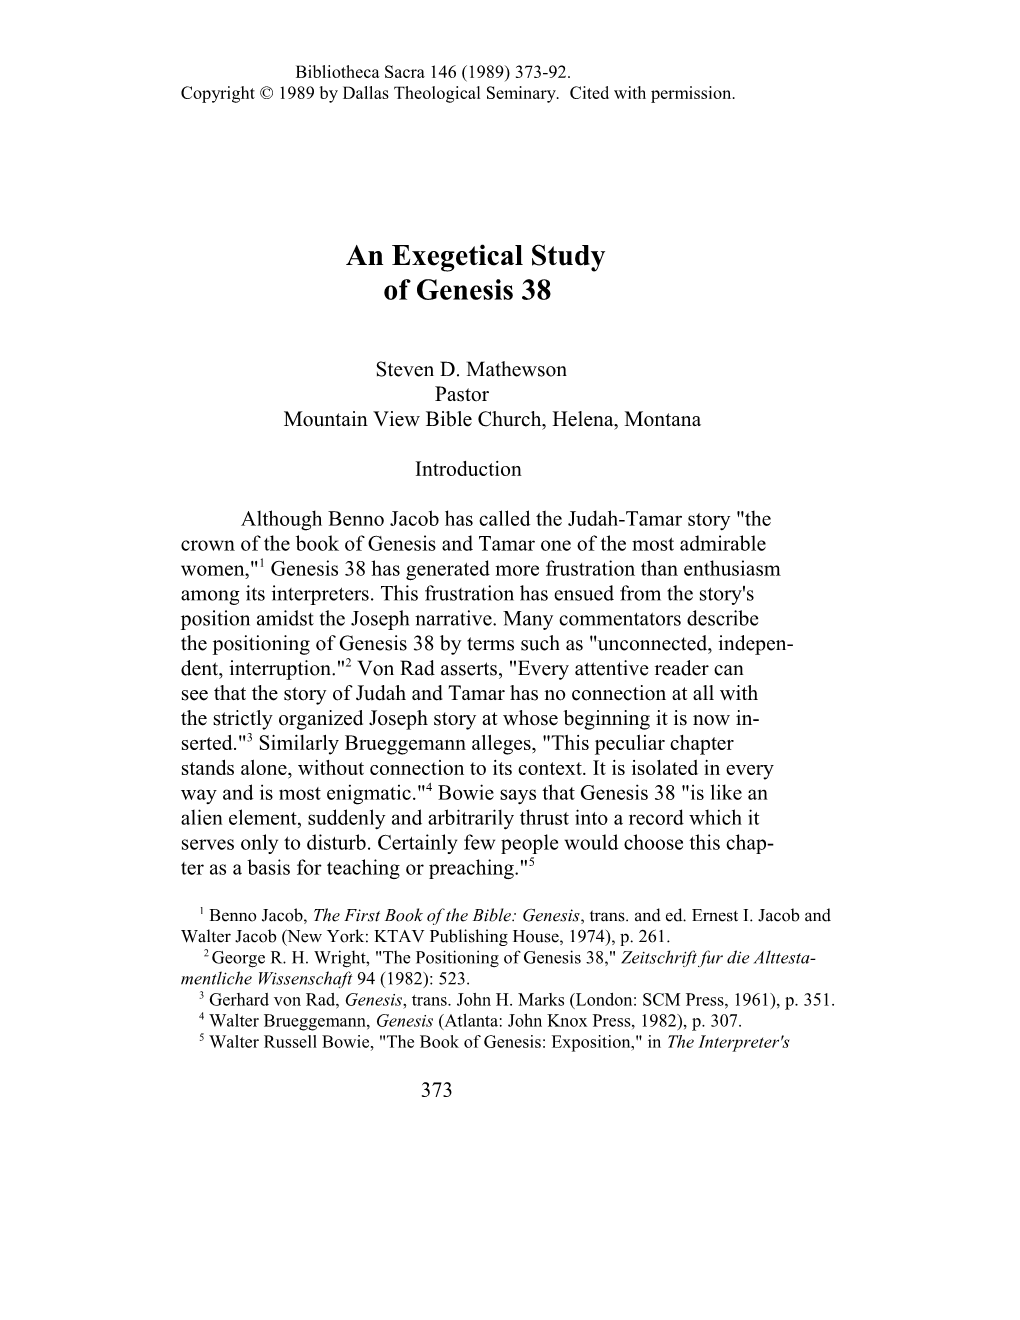 An Exegetical Study